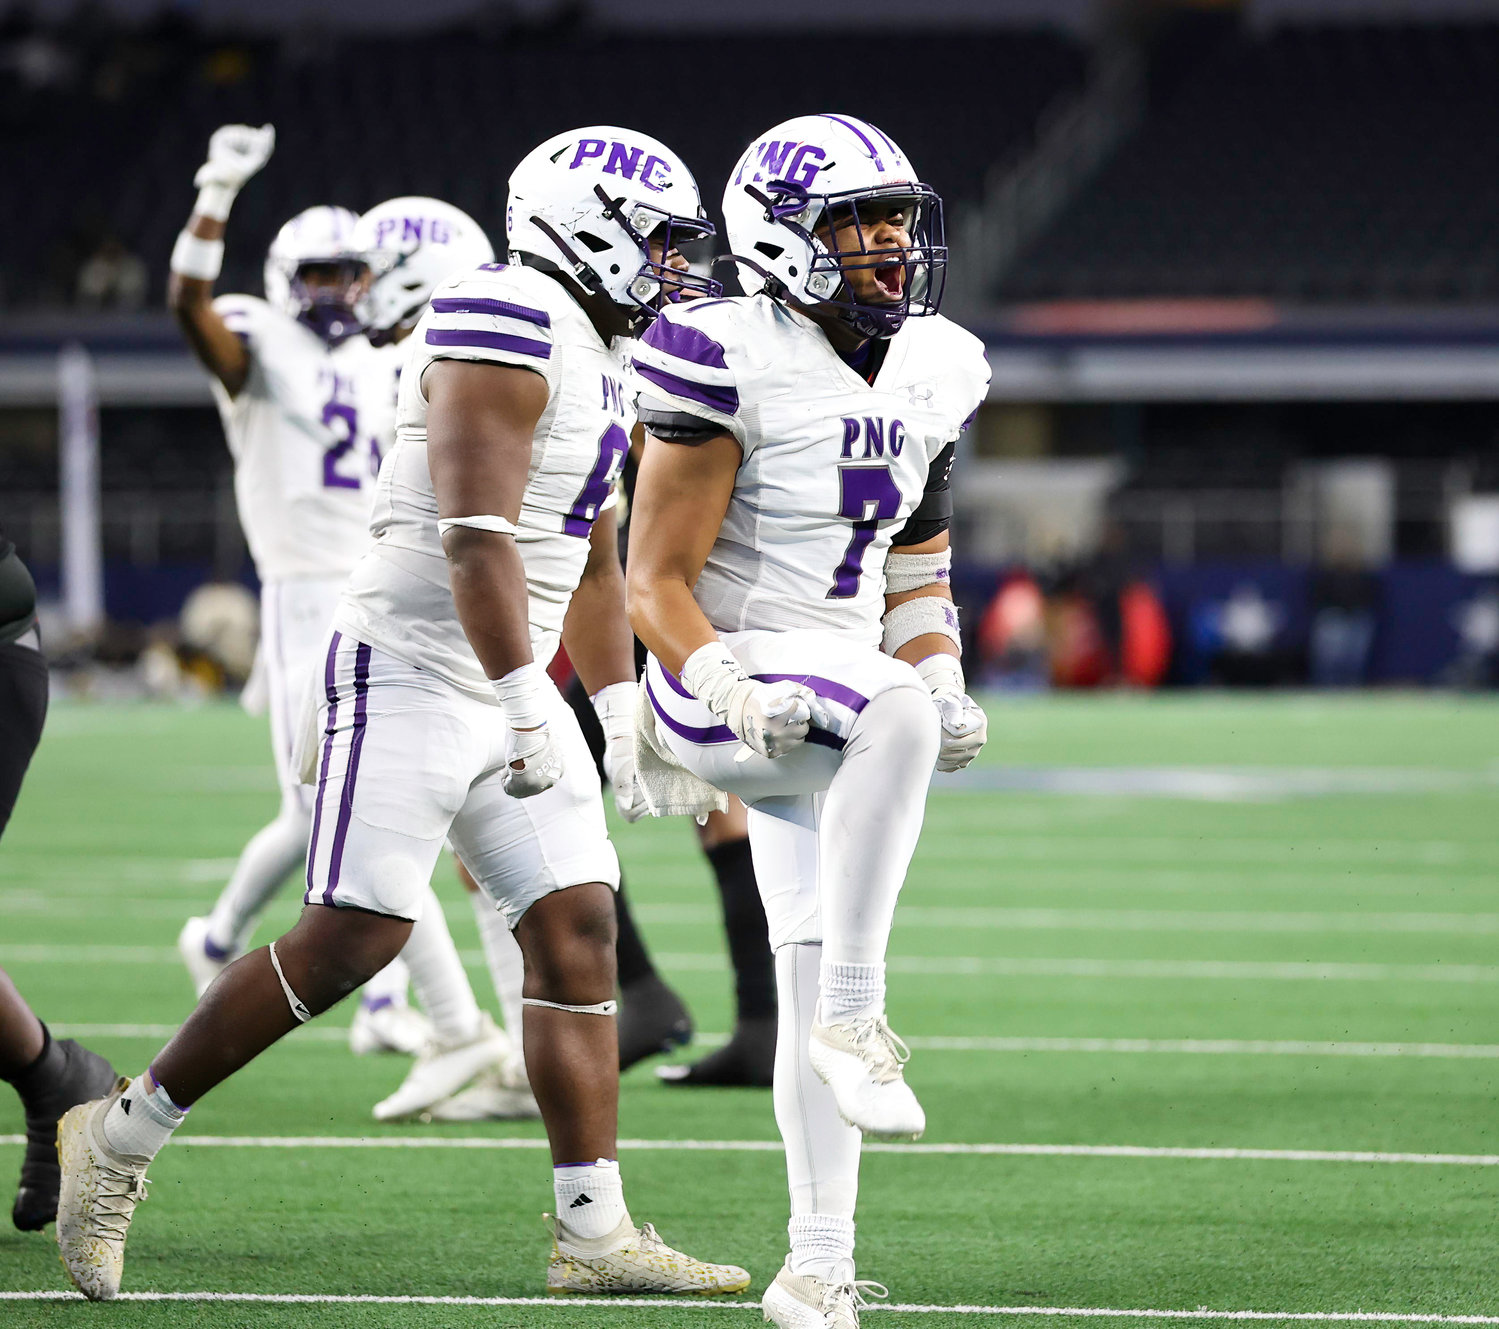 Port Neches-Groves linebacker Sean Gardiner (7) celebrates a defensive stop during the Class 5A Division II football state championship game between South Oak Cliff and Port Neches-Groves in Arlington, Texas, on Dec. 16, 2022.